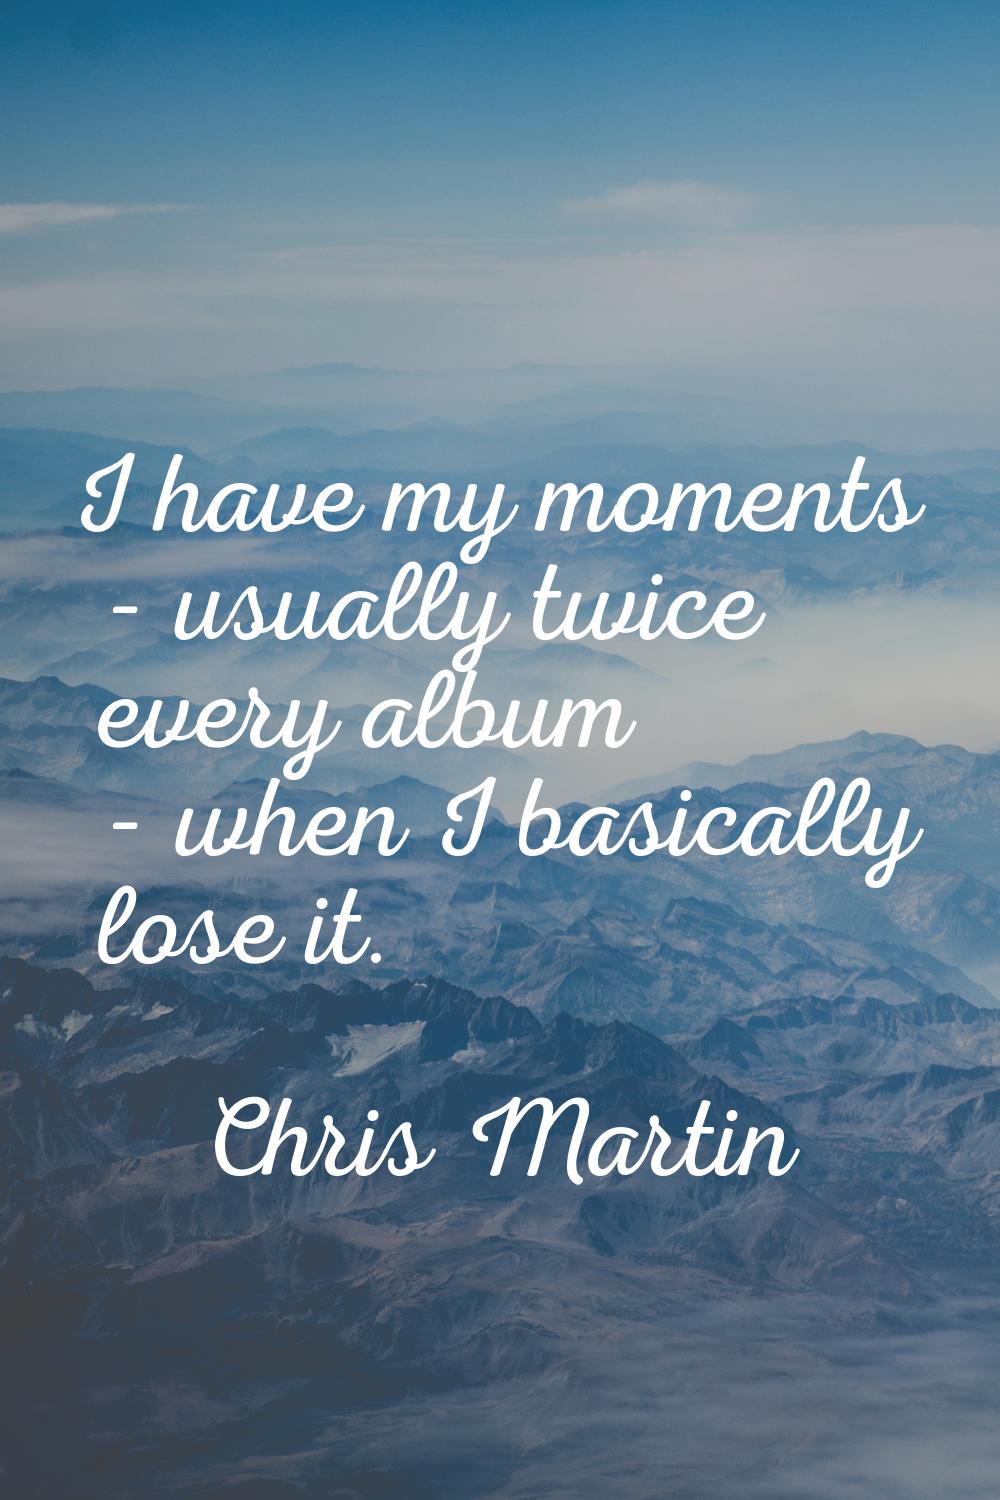 I have my moments - usually twice every album - when I basically lose it.